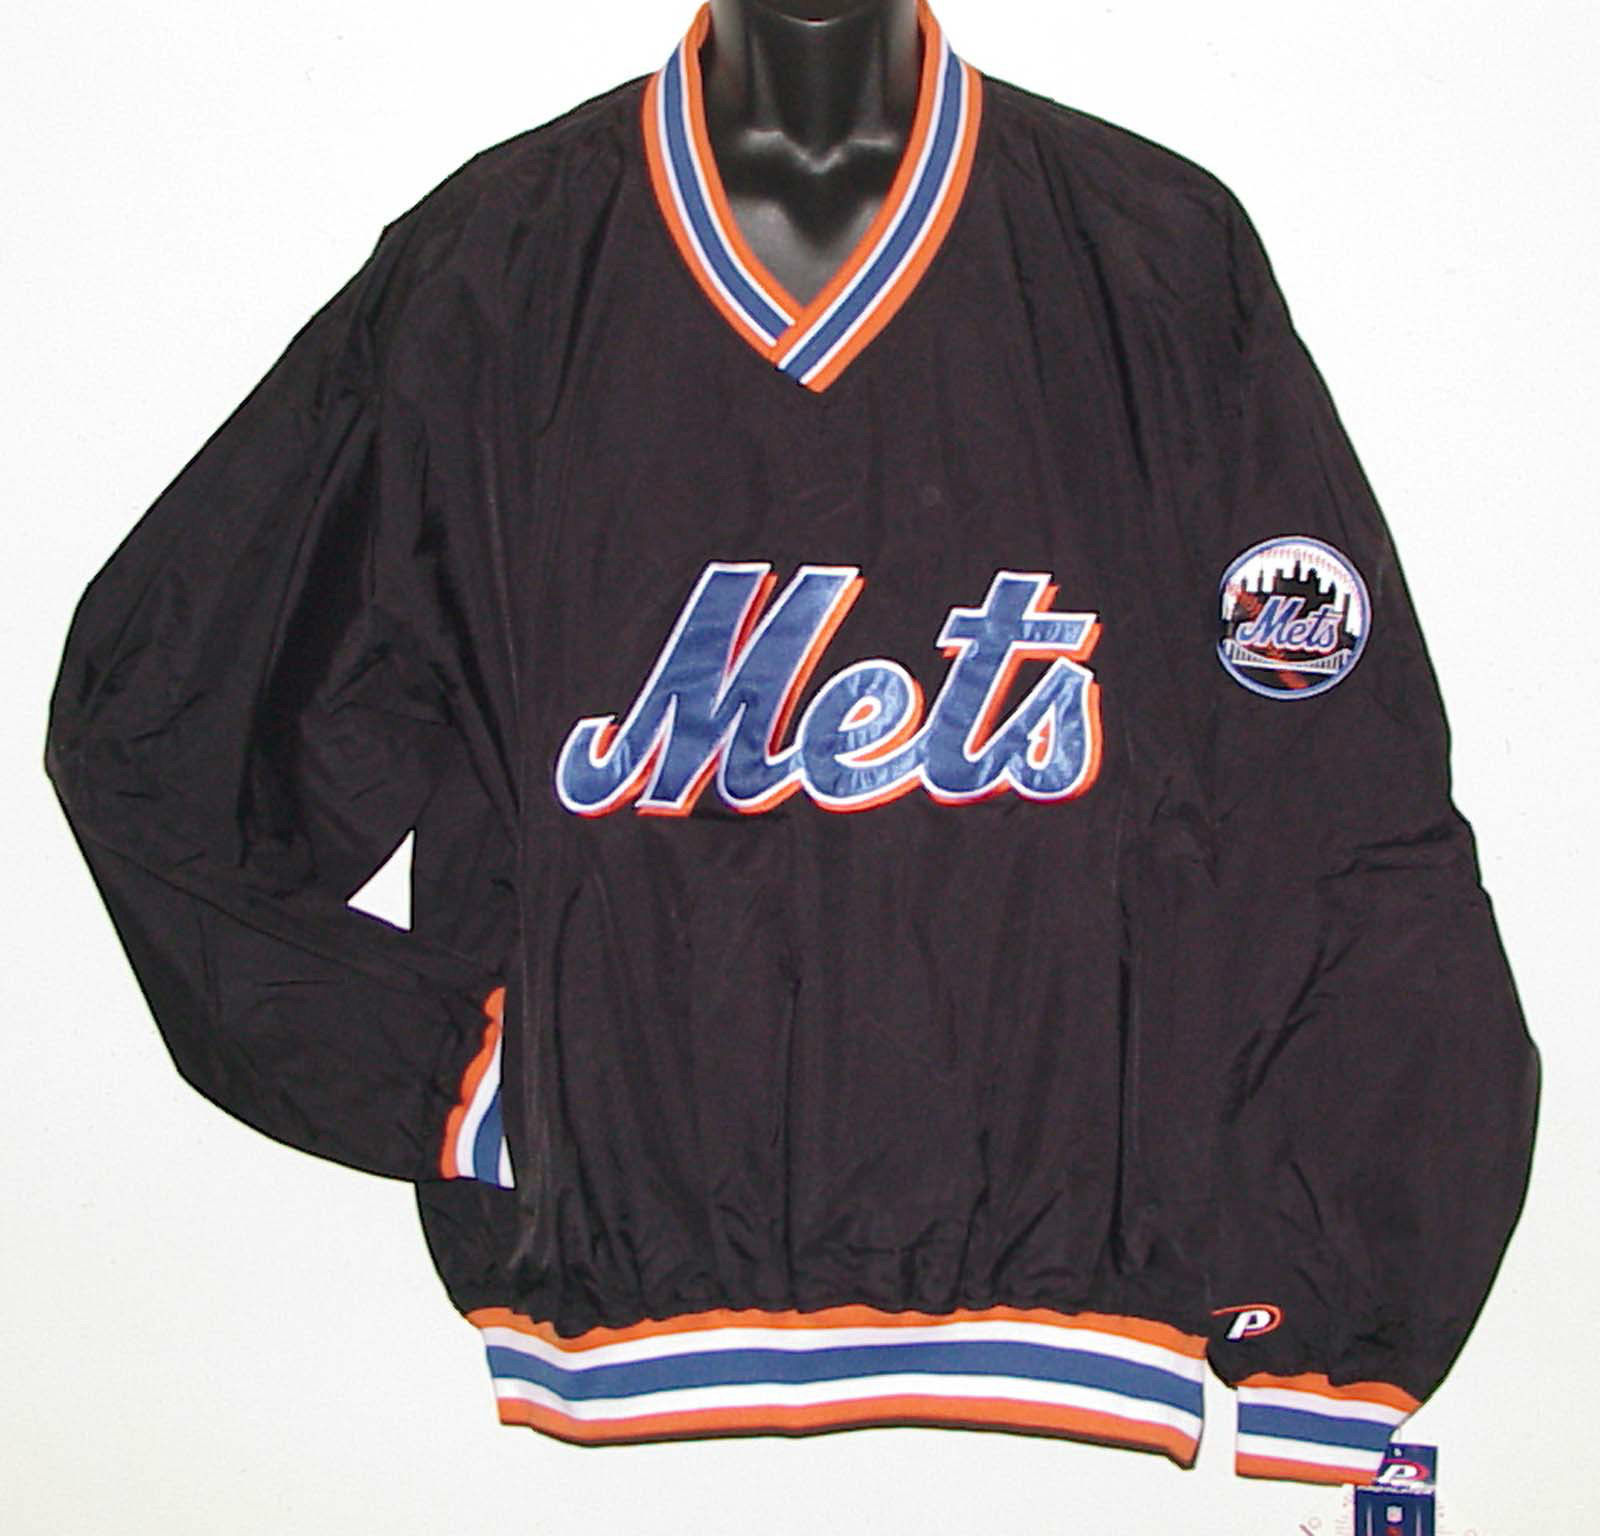 mets pullover jersey